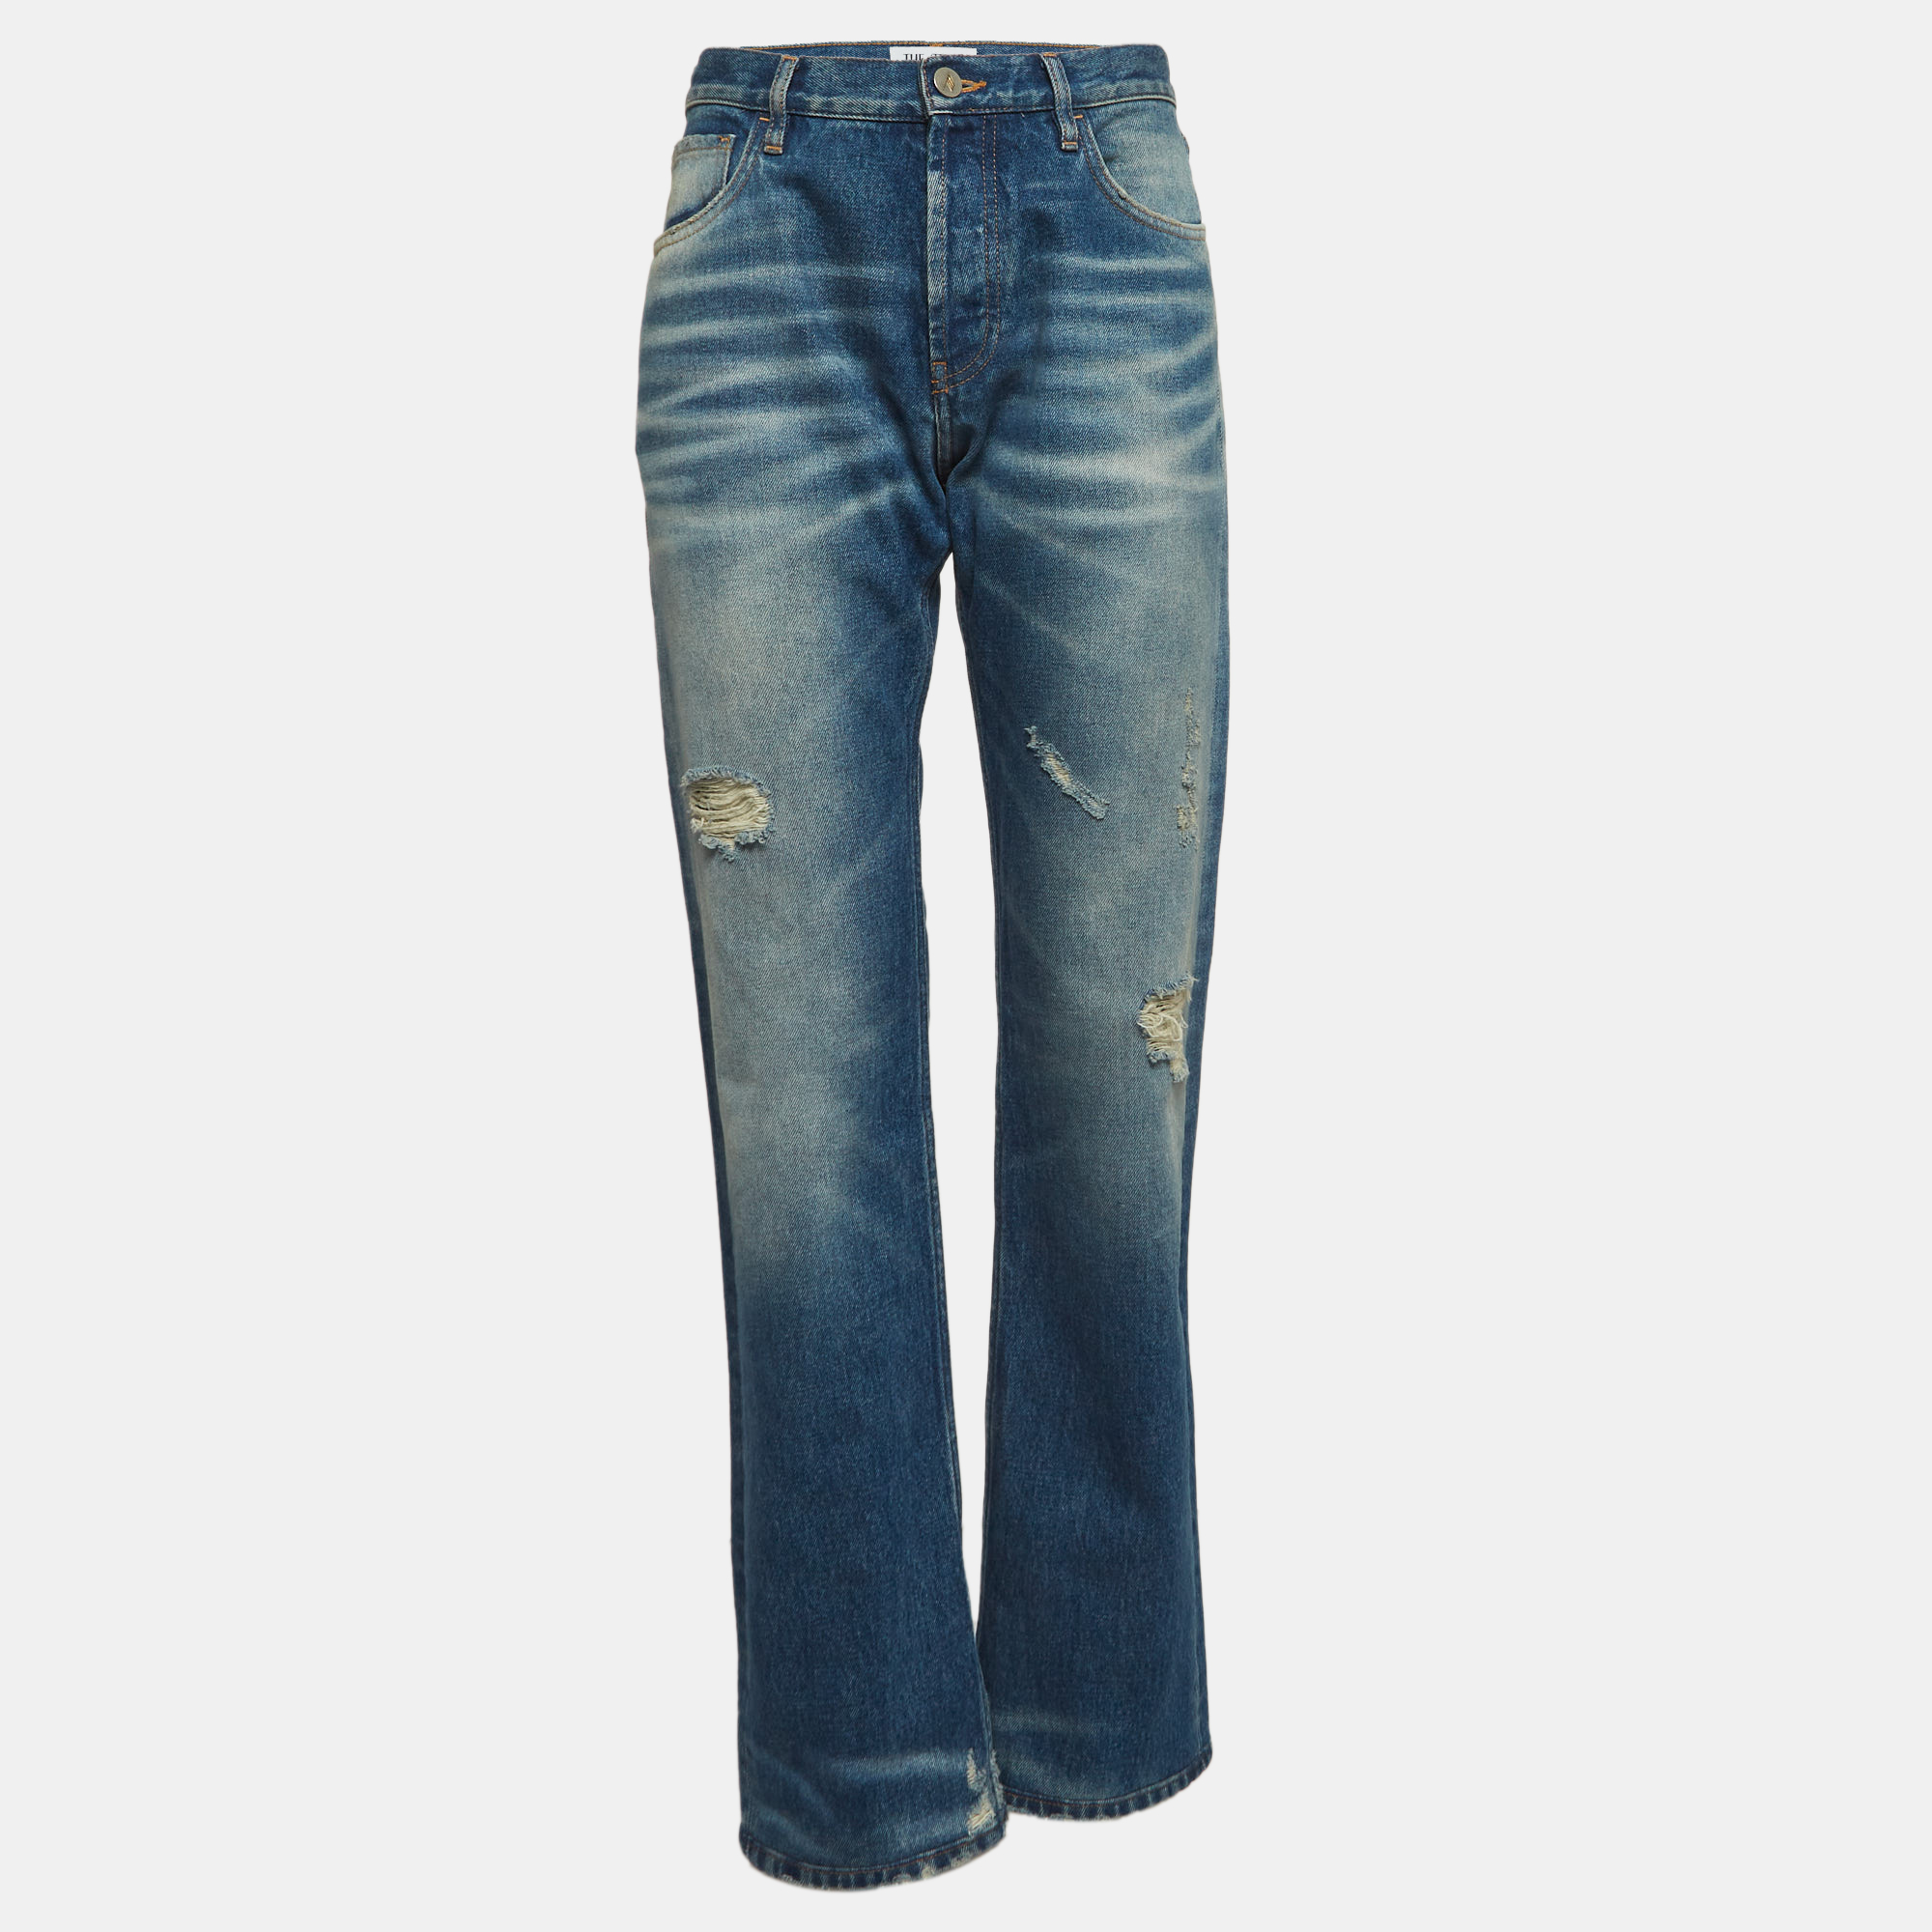 

The Attico Blue Washed Denim Distressed Jeans S Waist 27"